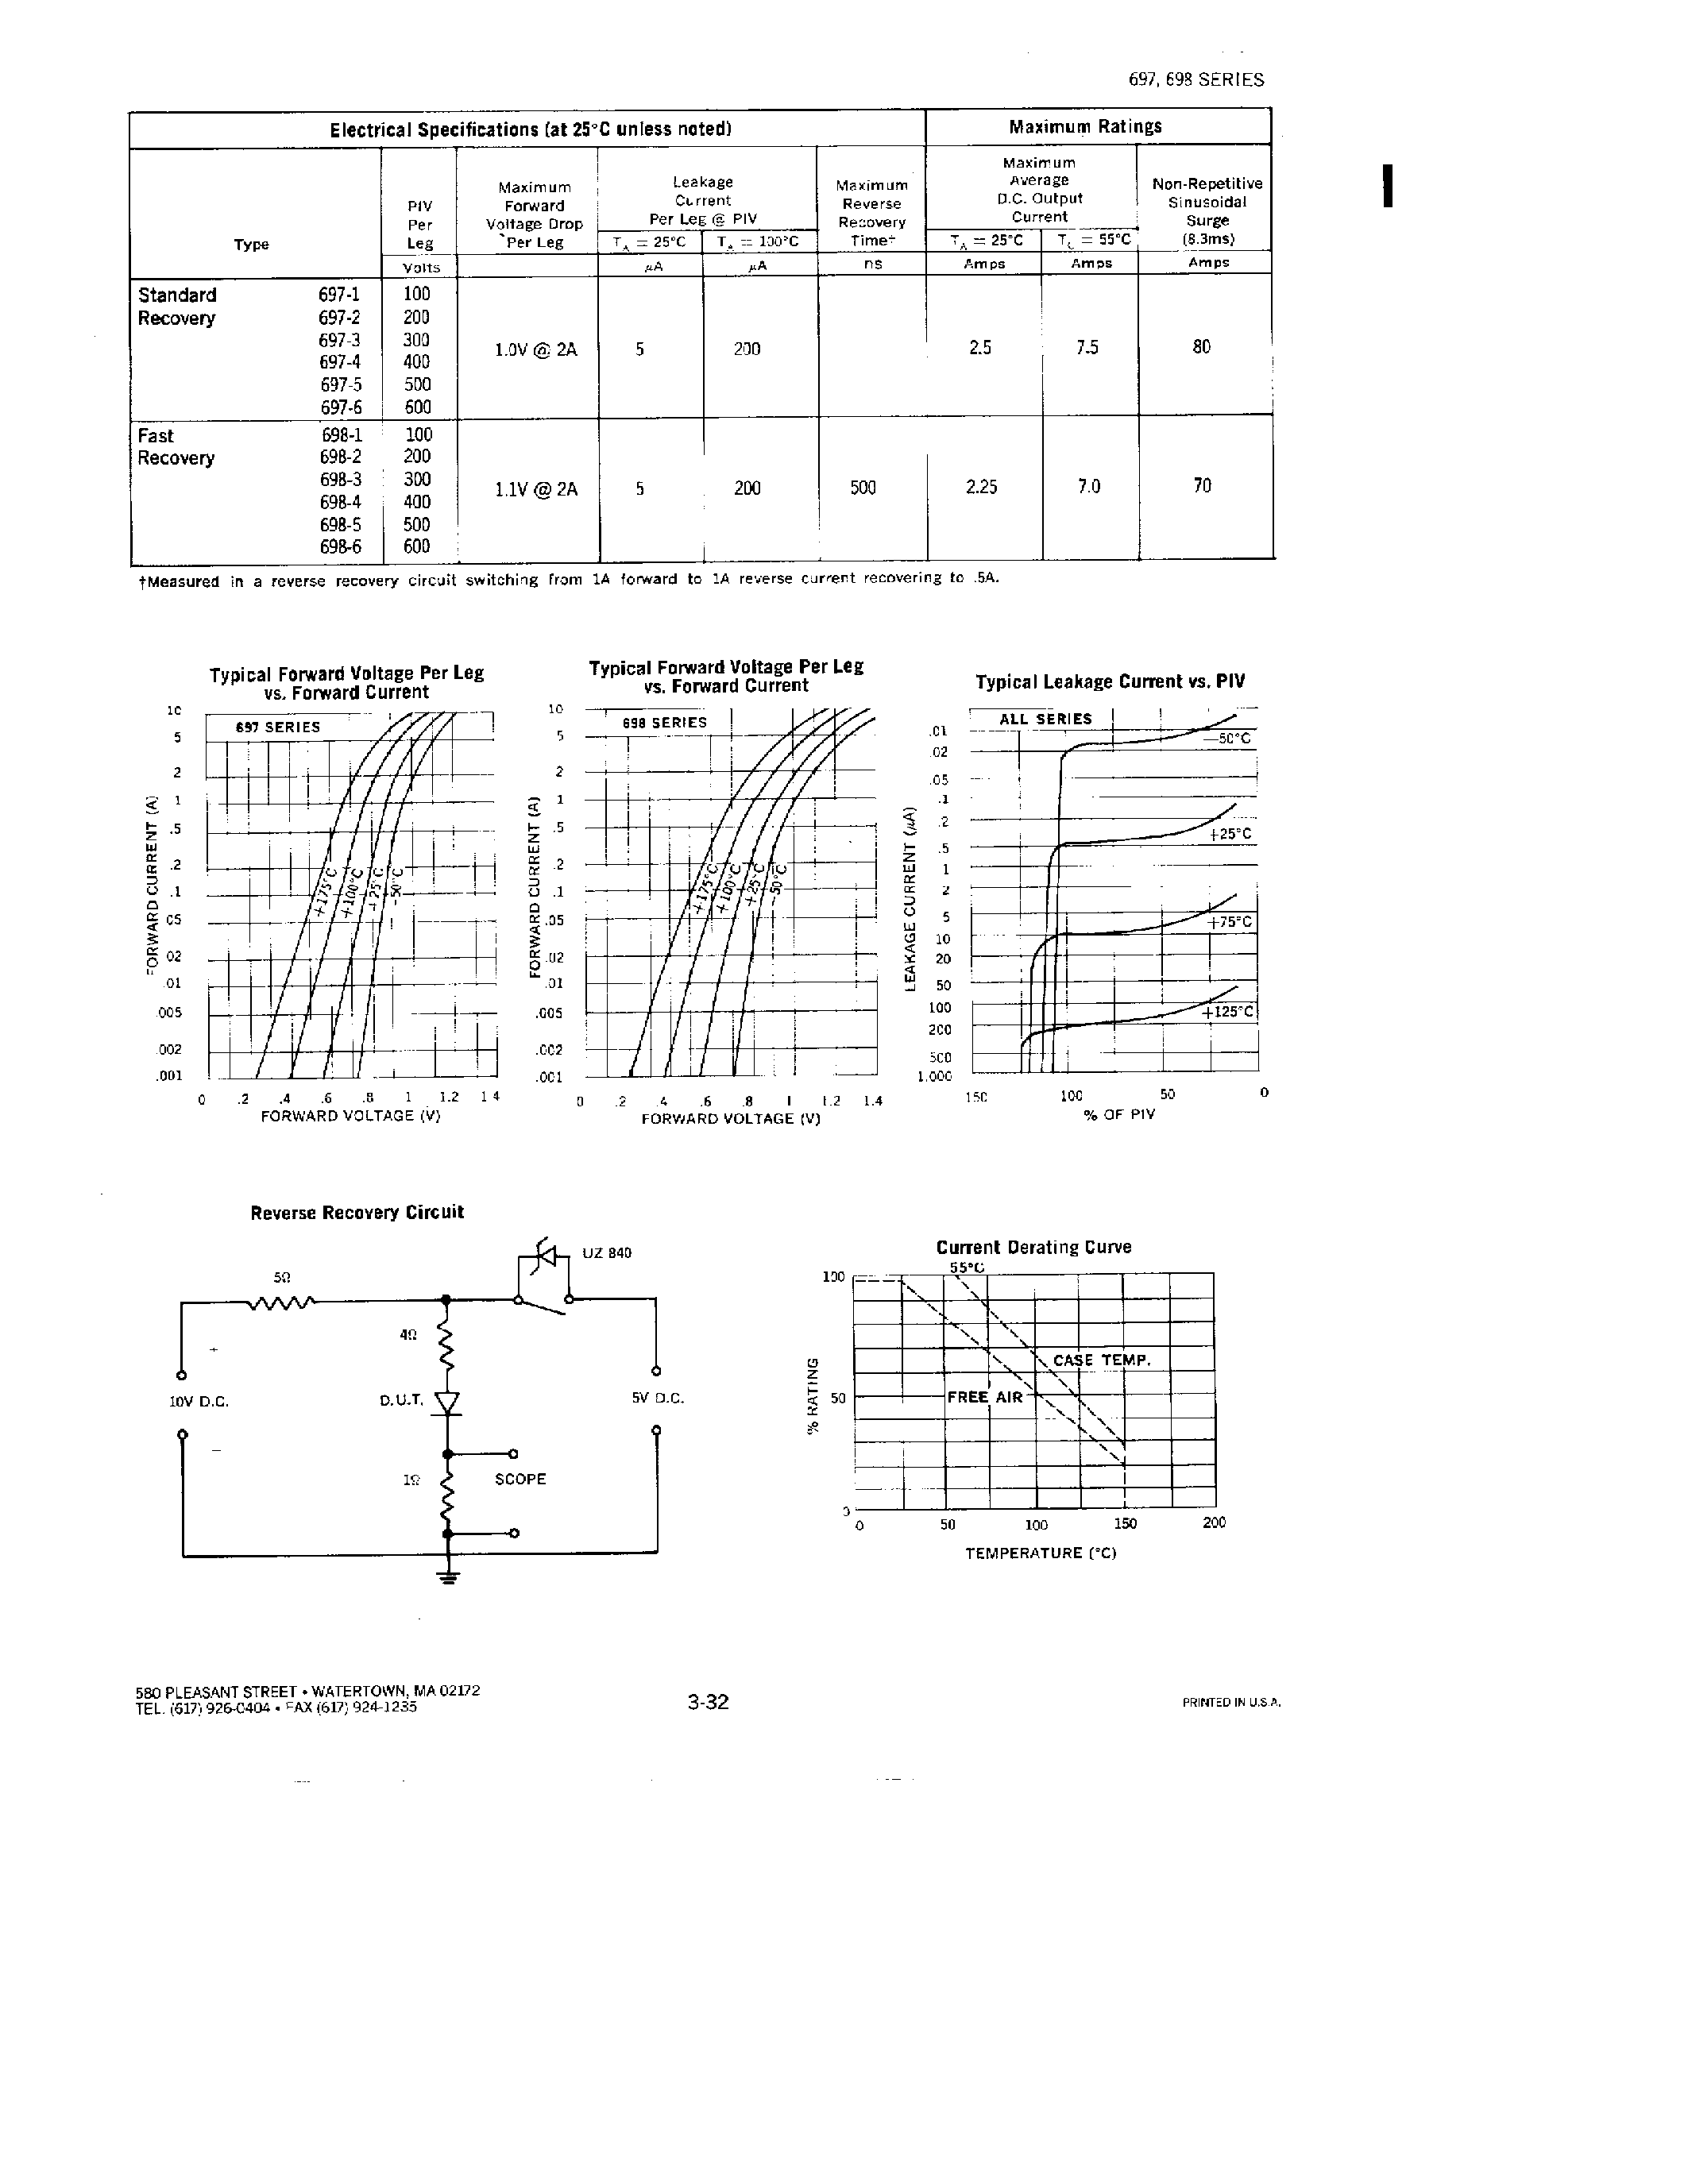 Datasheet 698-6 - RECTIFIERS ASSEMBLIES SINGLE PHASE BRIDGES/ 7.5 AMP/ STANDARD AND FAST RECOVERY page 2